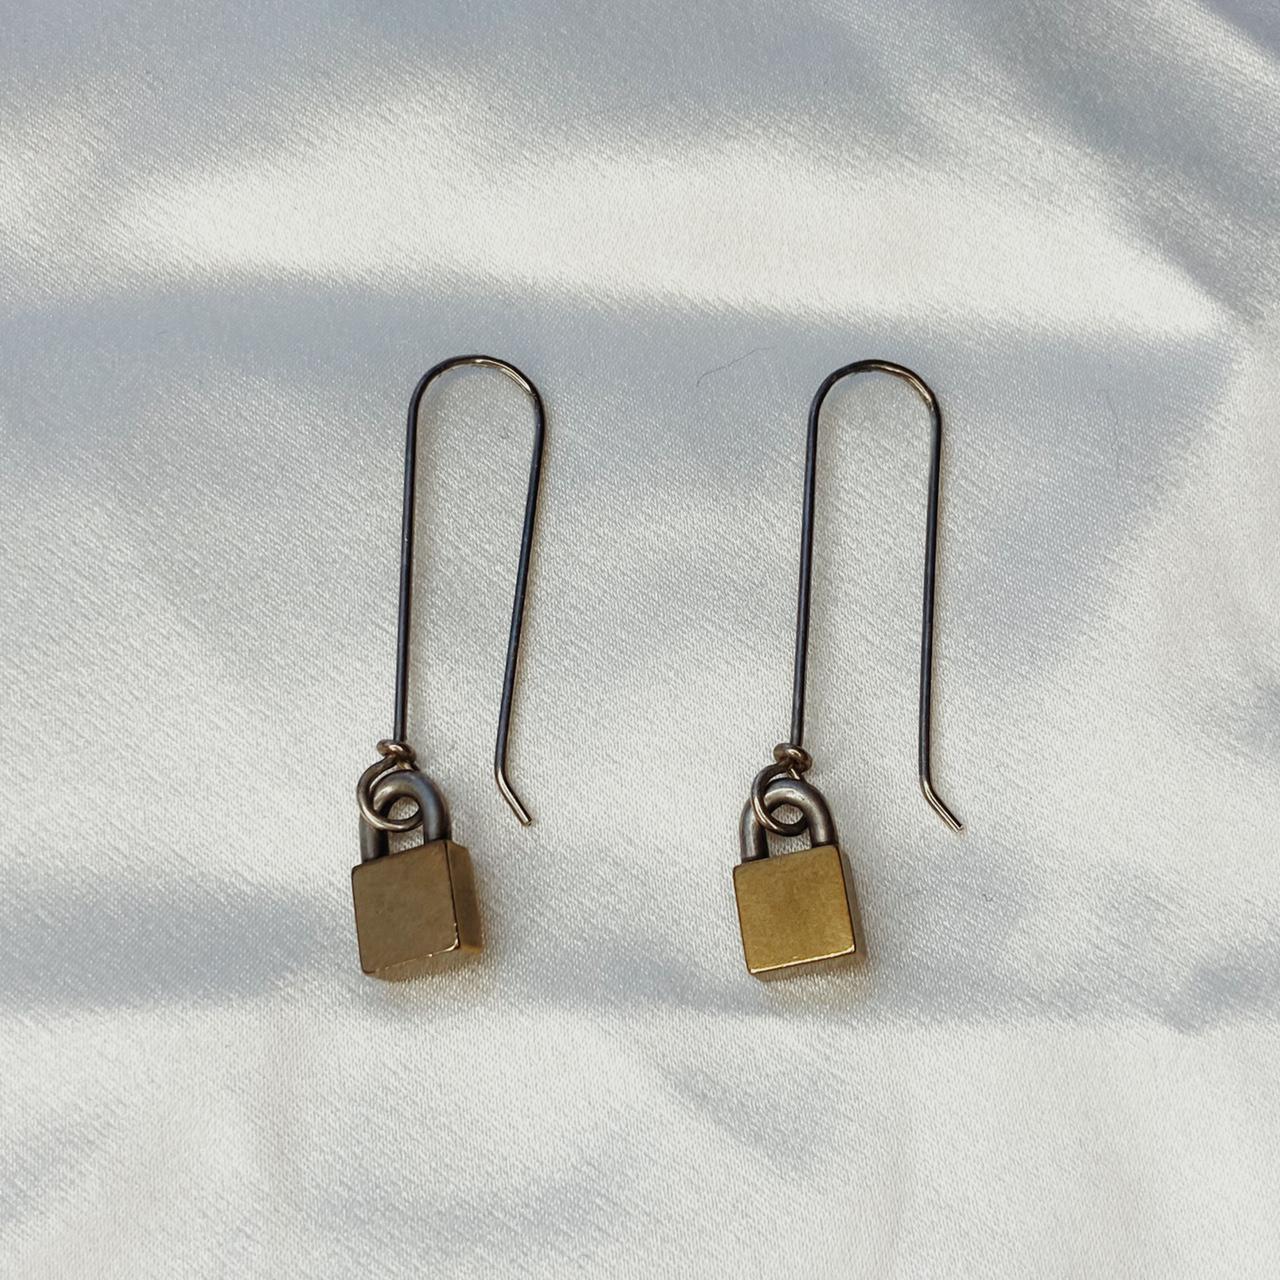 Product Image 1 - Connie verrusio lock earrings with